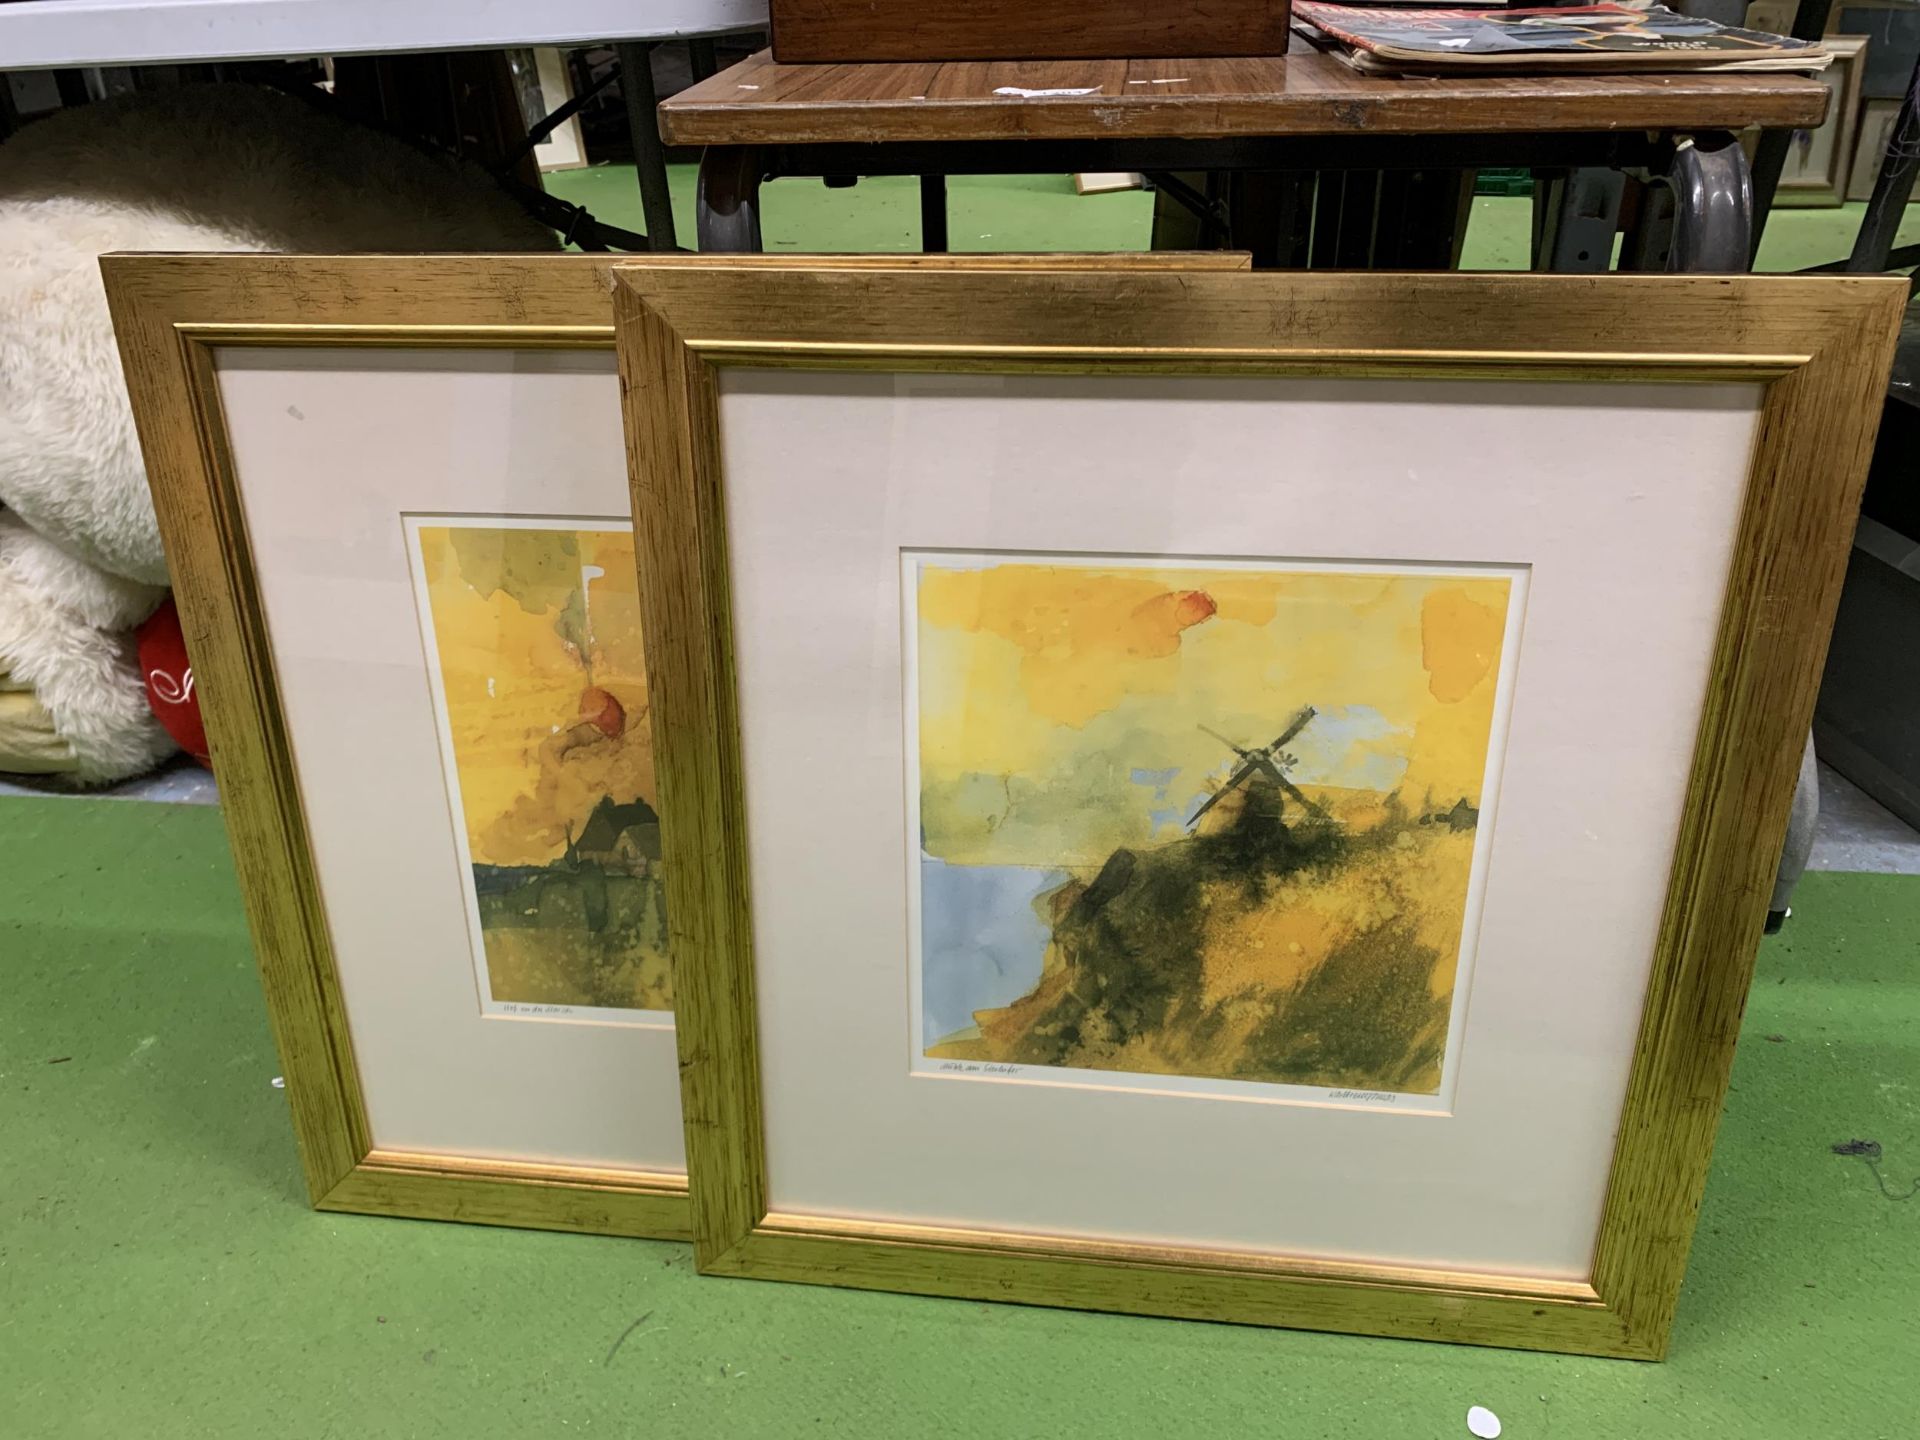 TWO GILT FRAMED PRINTS OF A WINDMILL AND RURAL SCENE